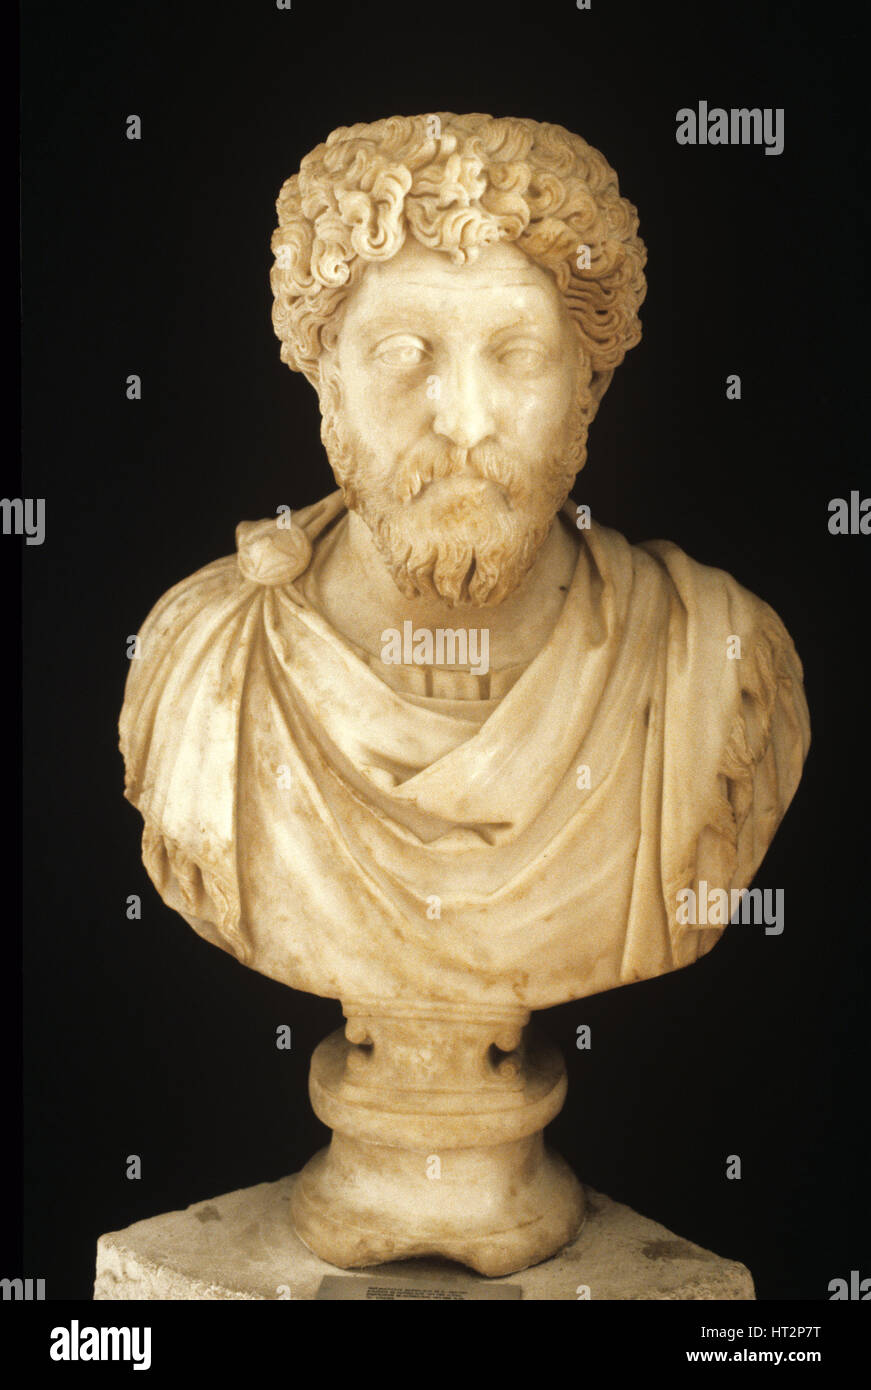 Marble Bust of Roman Emperor Marcus Aurelius (121-180AD) Reigned 161-180AD). From Selcuk Western Turkey. Stock Photo